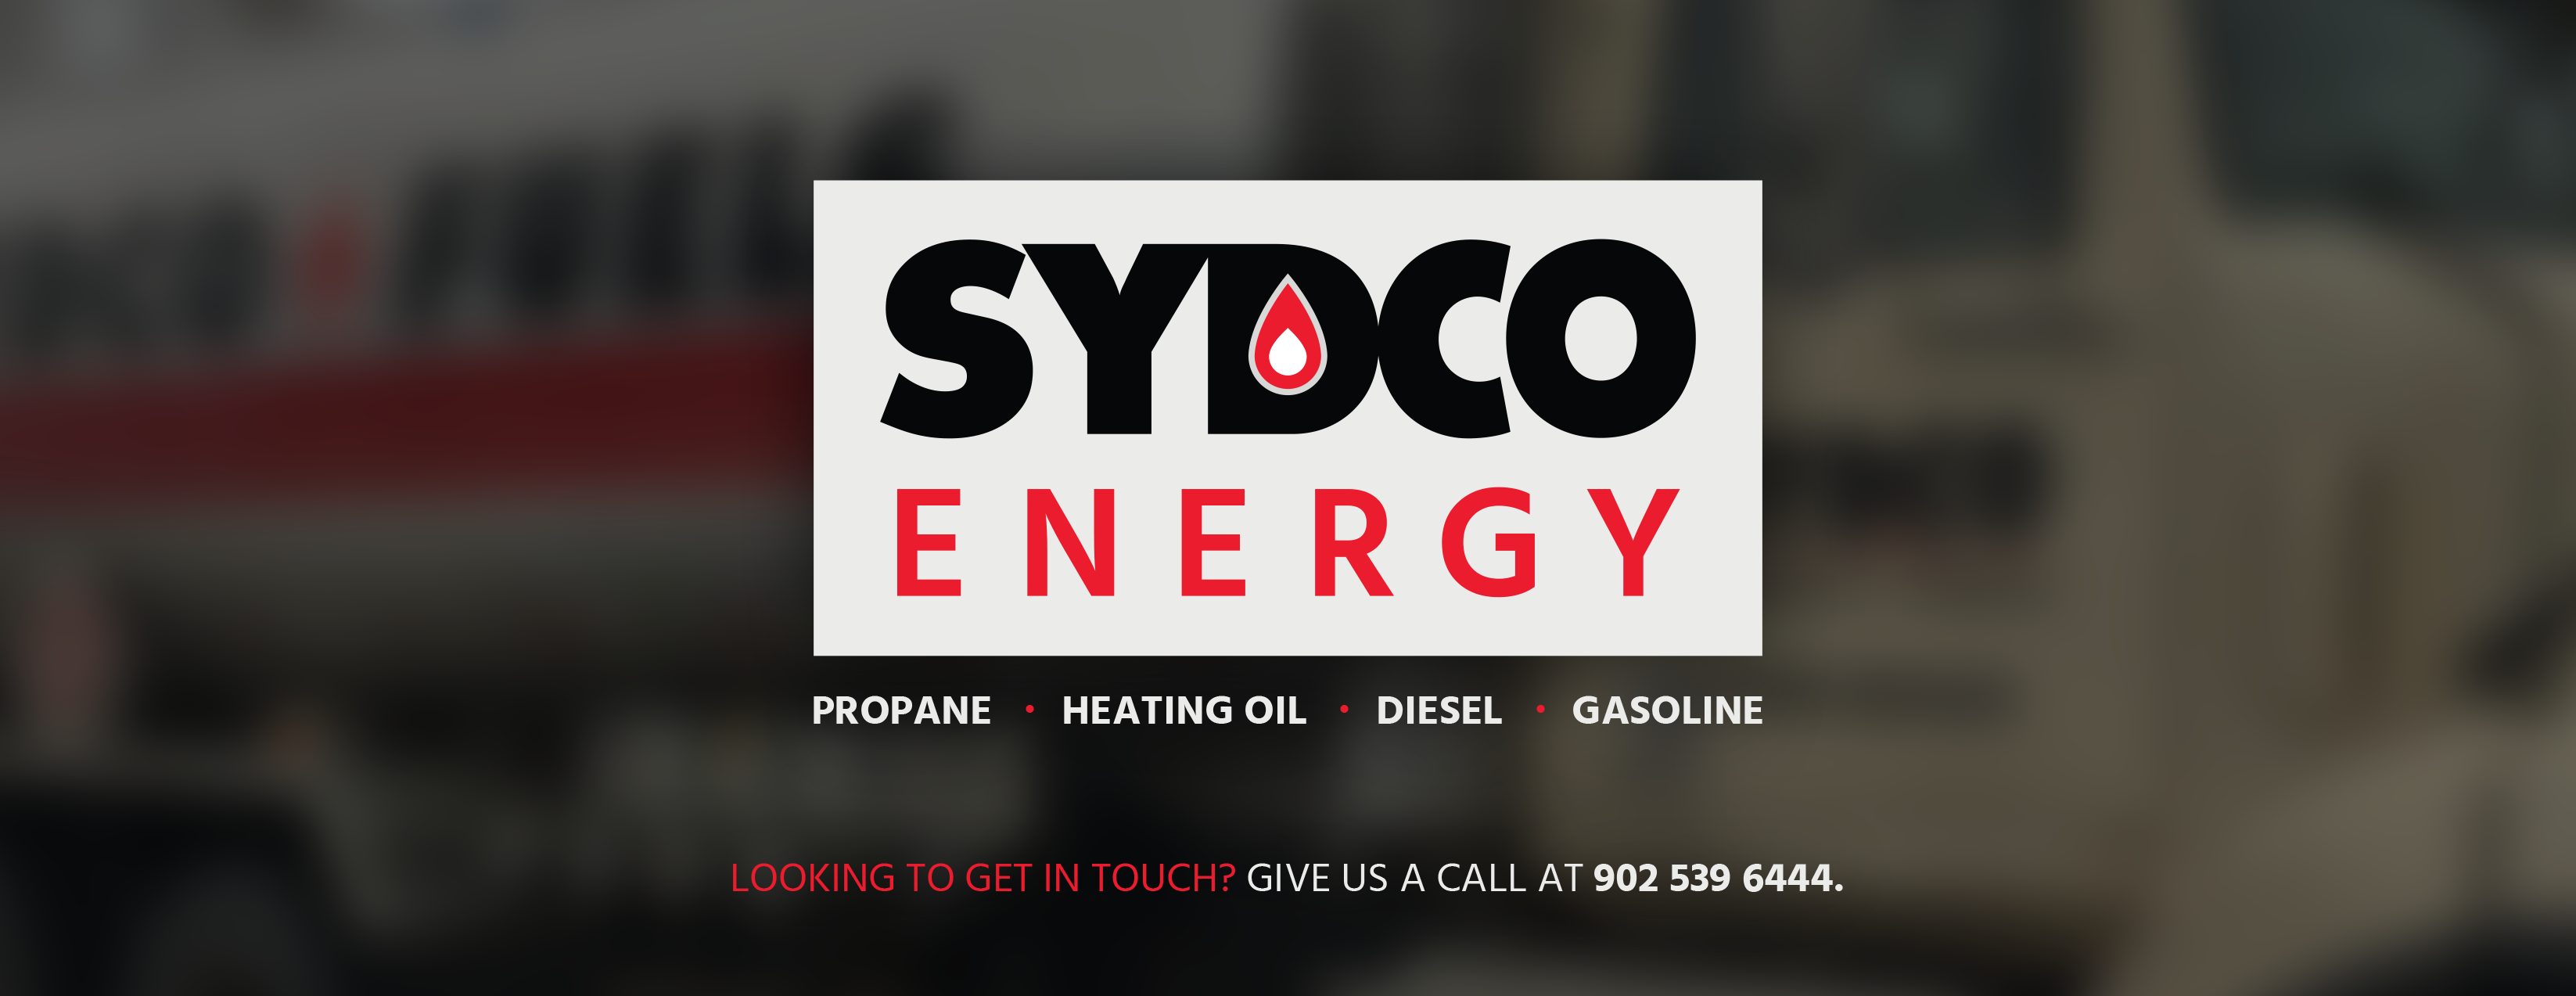 Sydco Fuels Limited